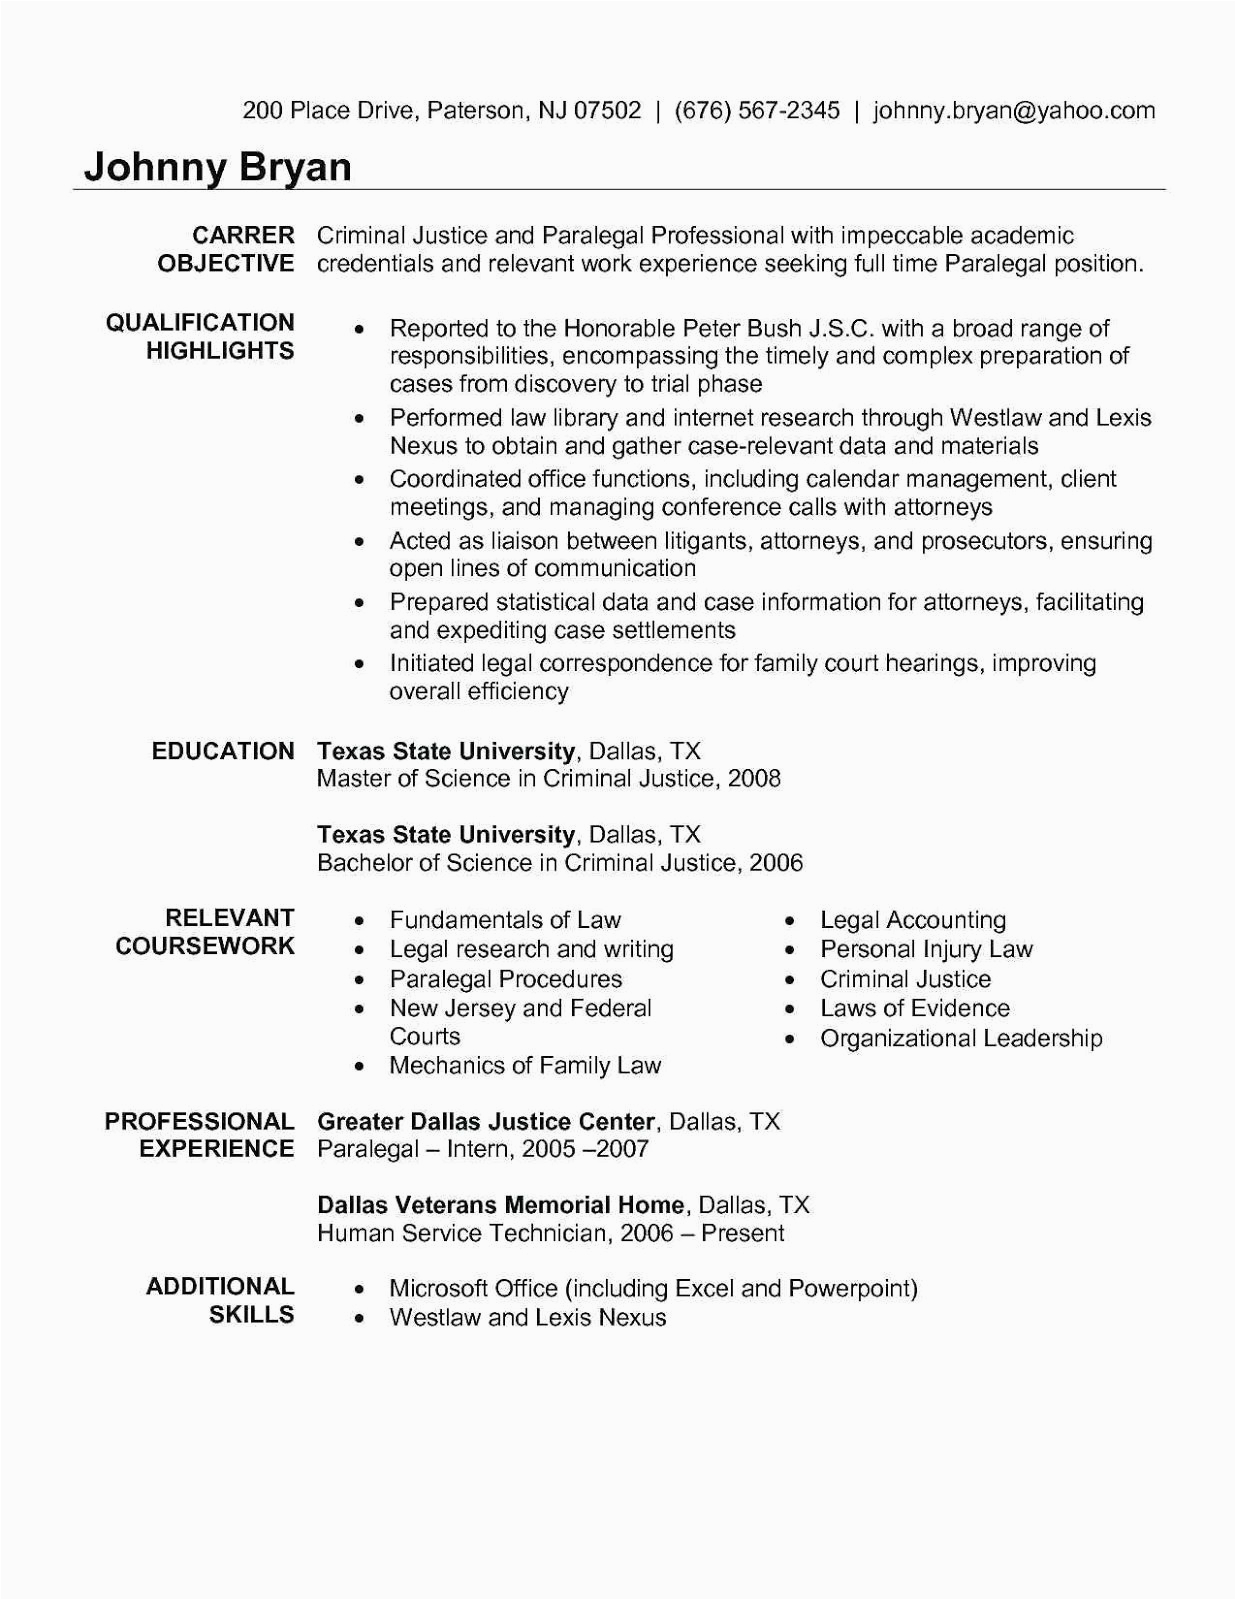 Sample Resume for Paralegal with No Experience Paralegal Resume Sample 2019 Paralegal Resume Examples 2020